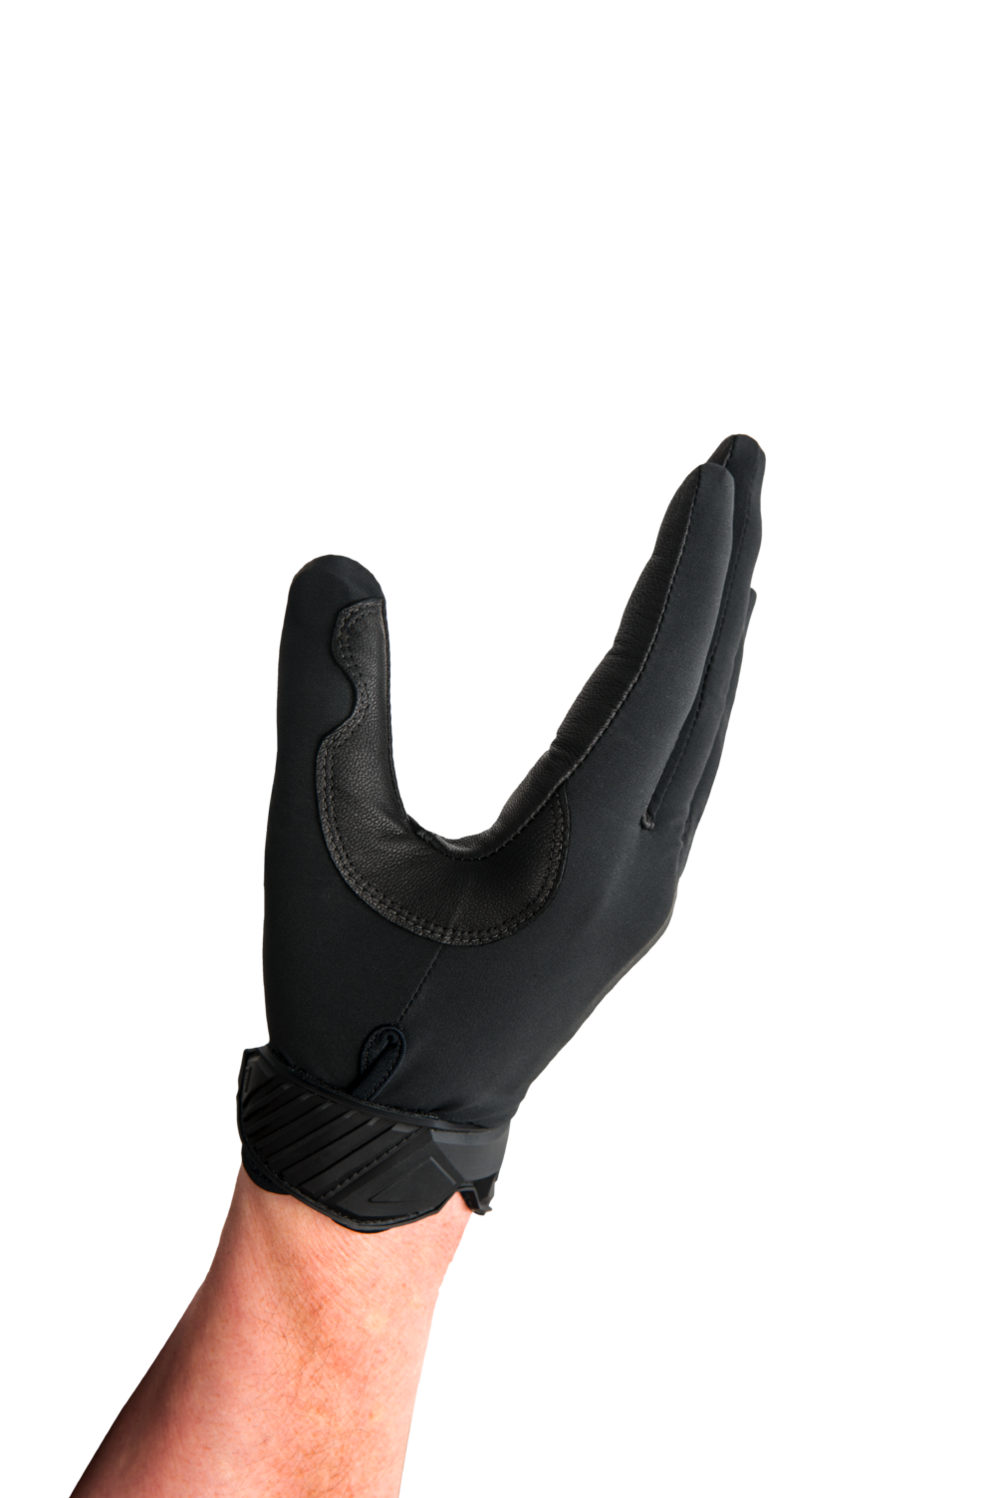 Body Armour Canada Bullet & Cut Resistant Products - First Tactical Men's  Hard Knuckle Glove